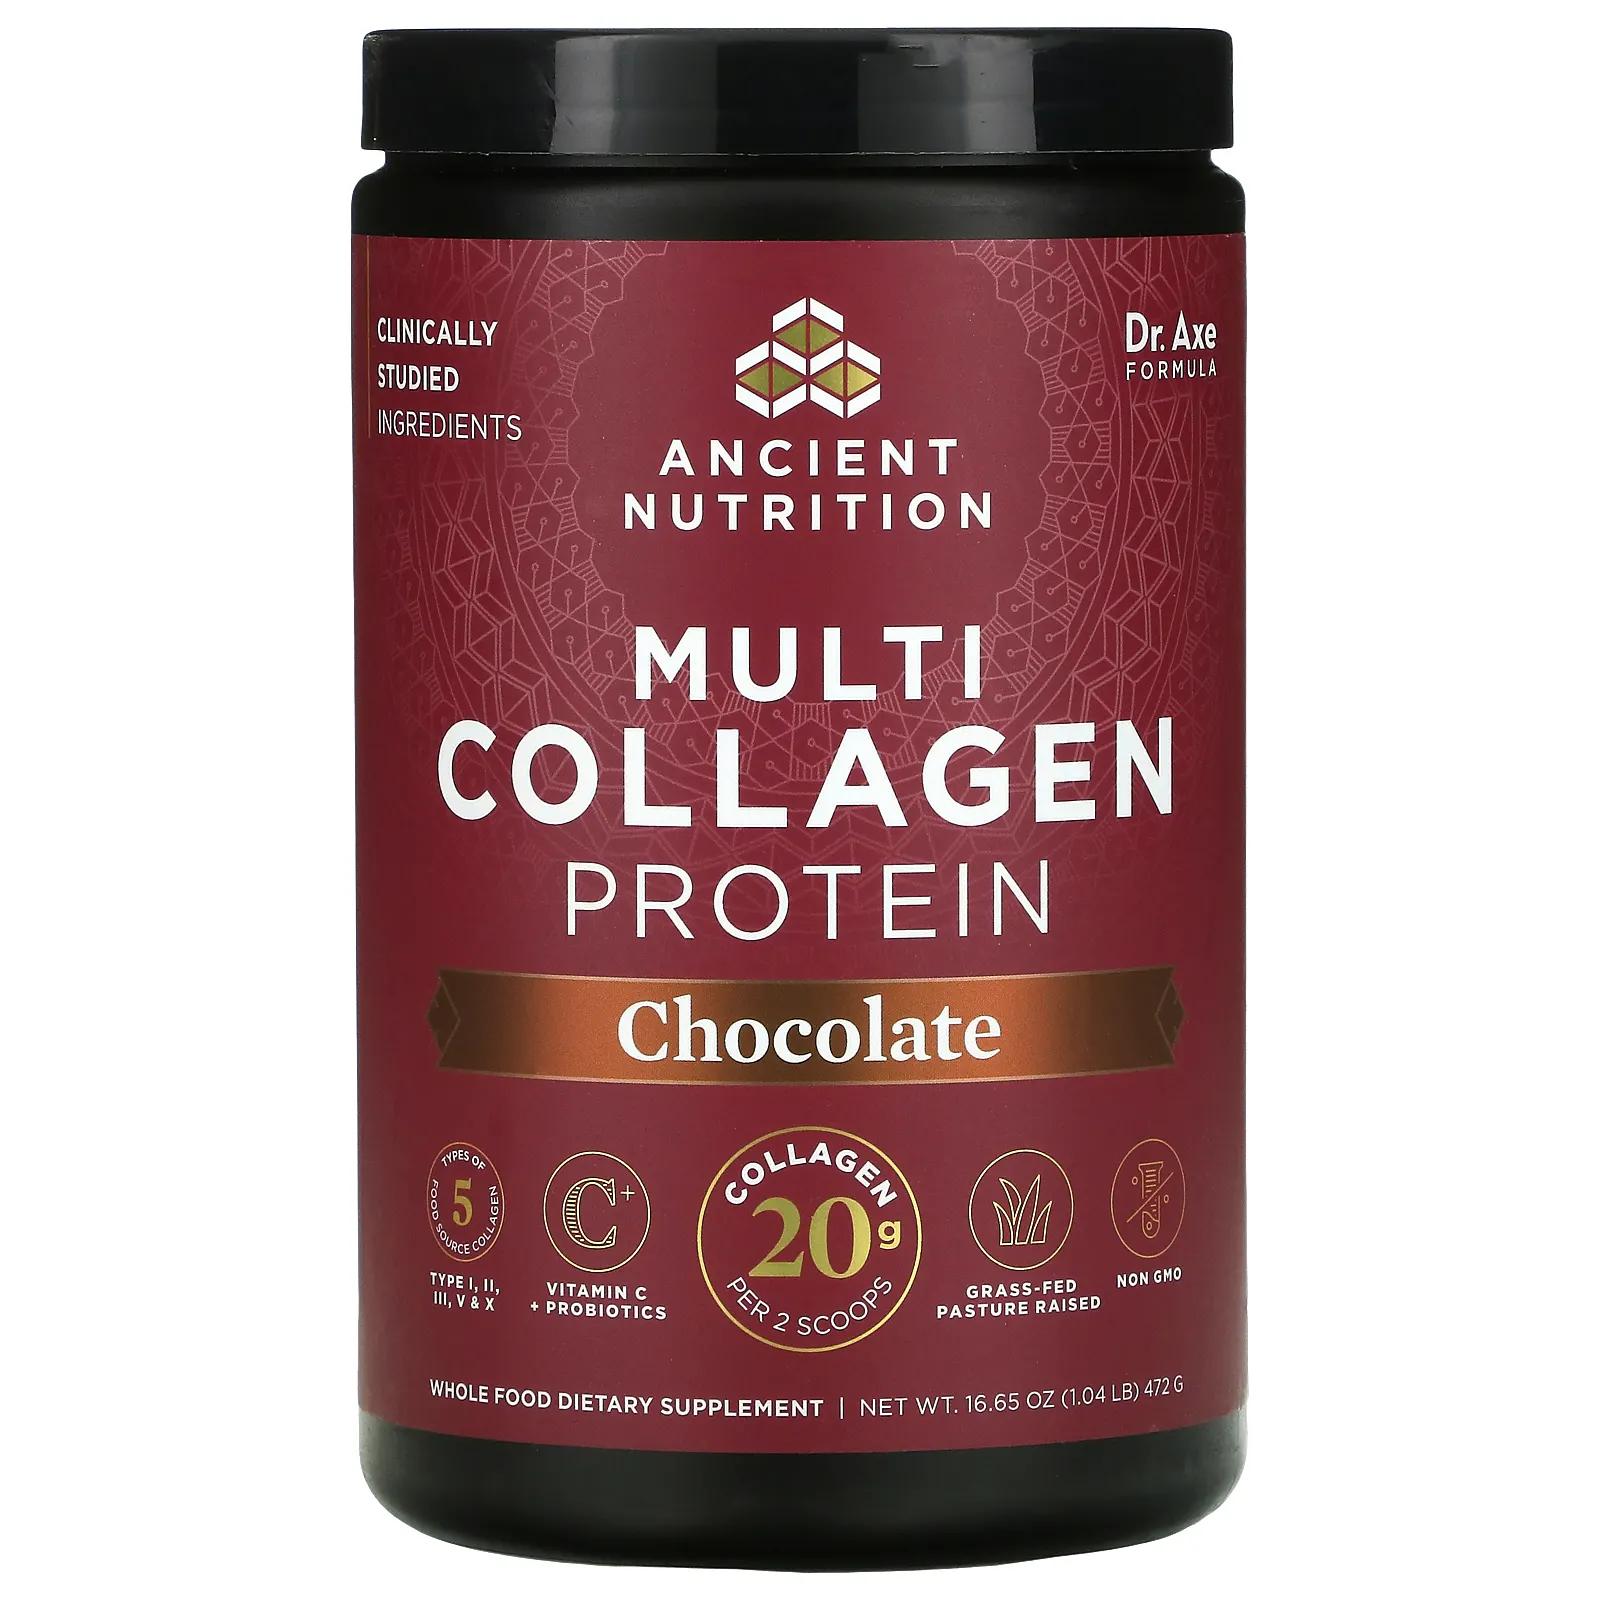 Dr. Axe / Ancient Nutrition Multi Collagen Protein Chocolate 18.5 oz (525 g) dr axe ancient nutrition bone broth protein куркума 460 г 1 фунт